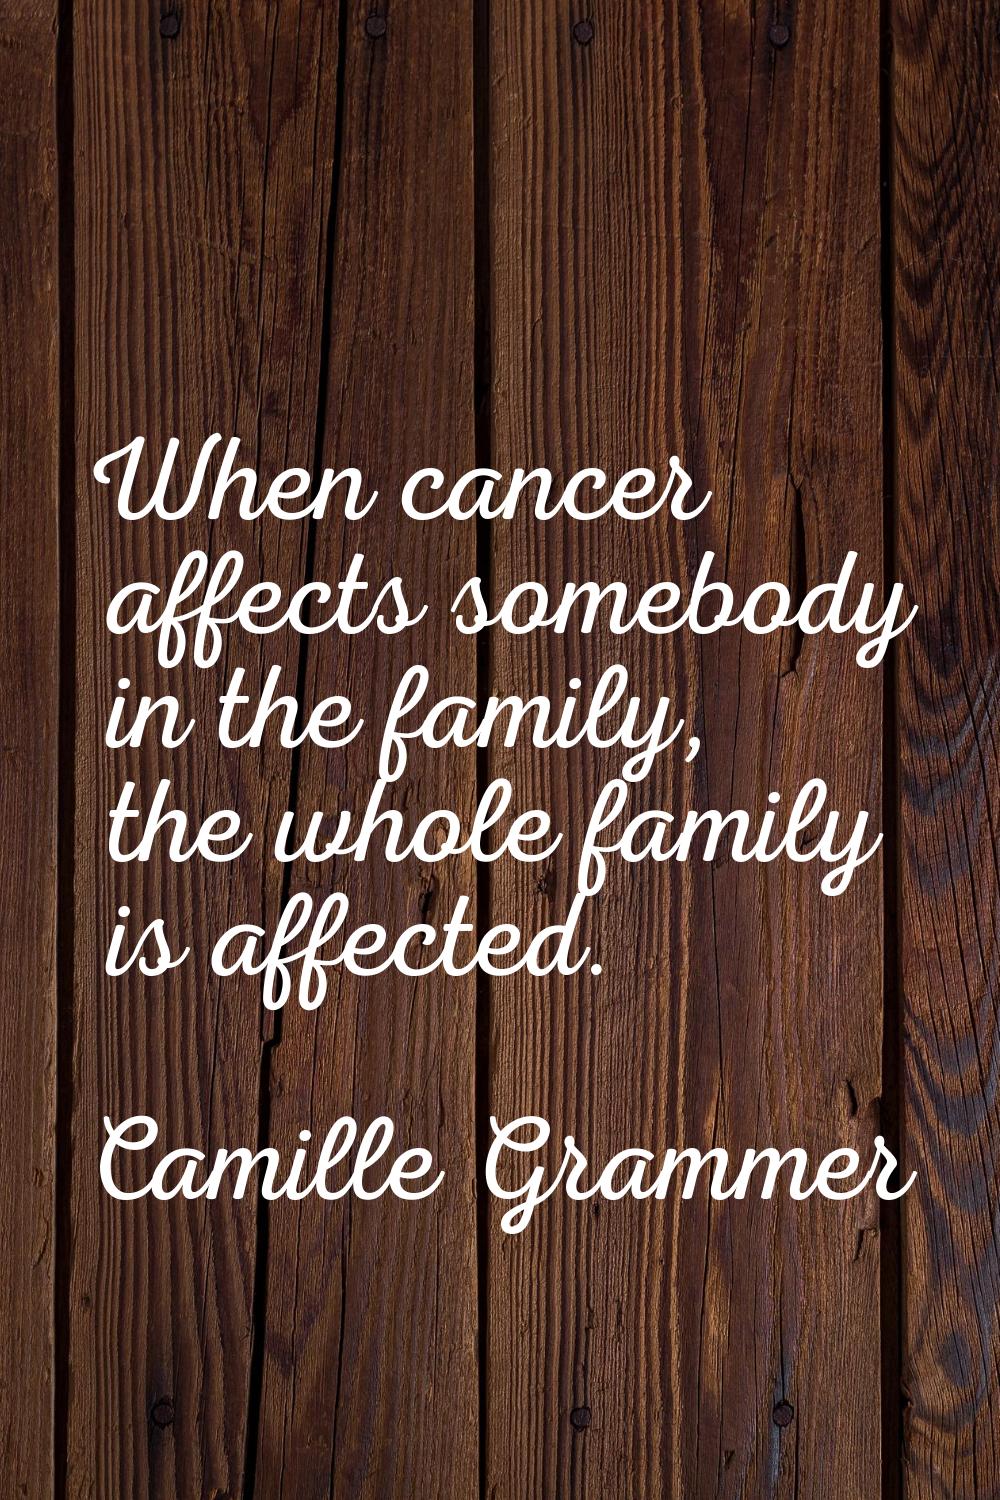 When cancer affects somebody in the family, the whole family is affected.